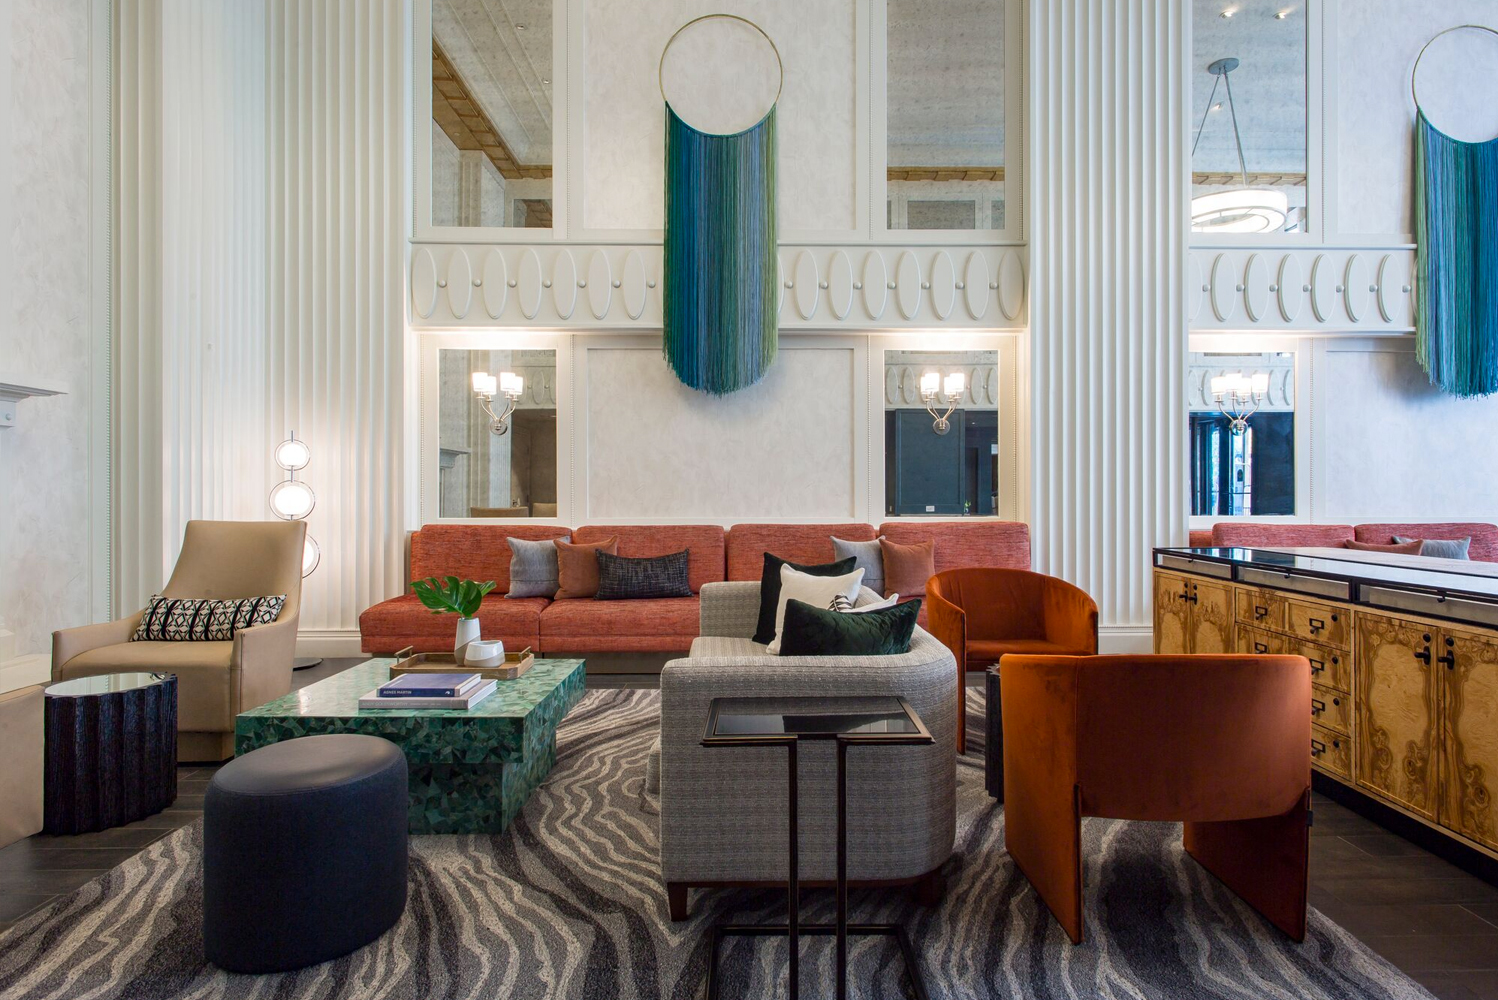 Kimpton Hotel Monaco Chicago completed a full renovation of its lobby guestrooms and suites